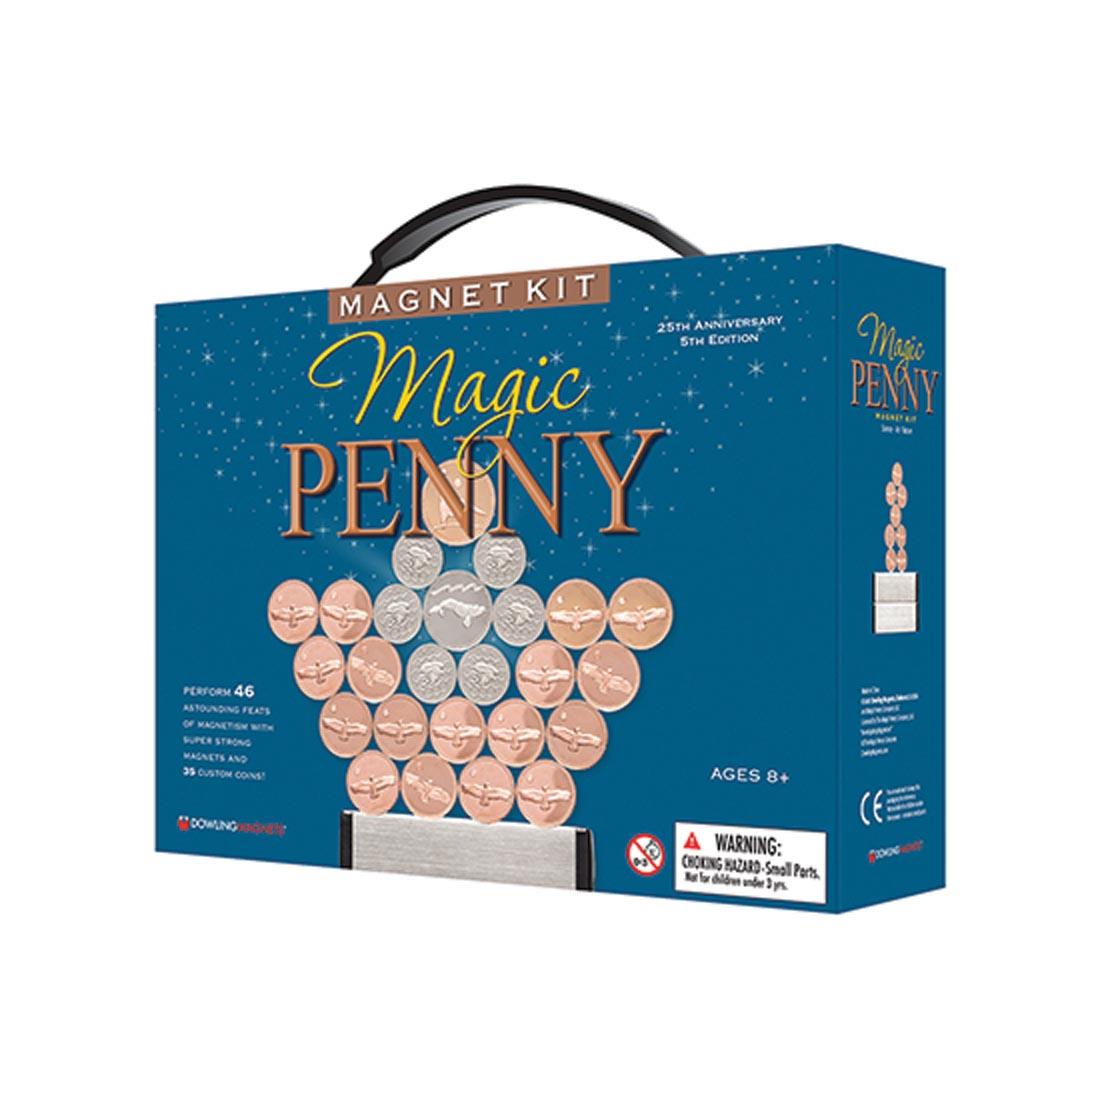 box for Magic Penny 25th Anniversary Edition Magnet Kit by Dowling Magnets